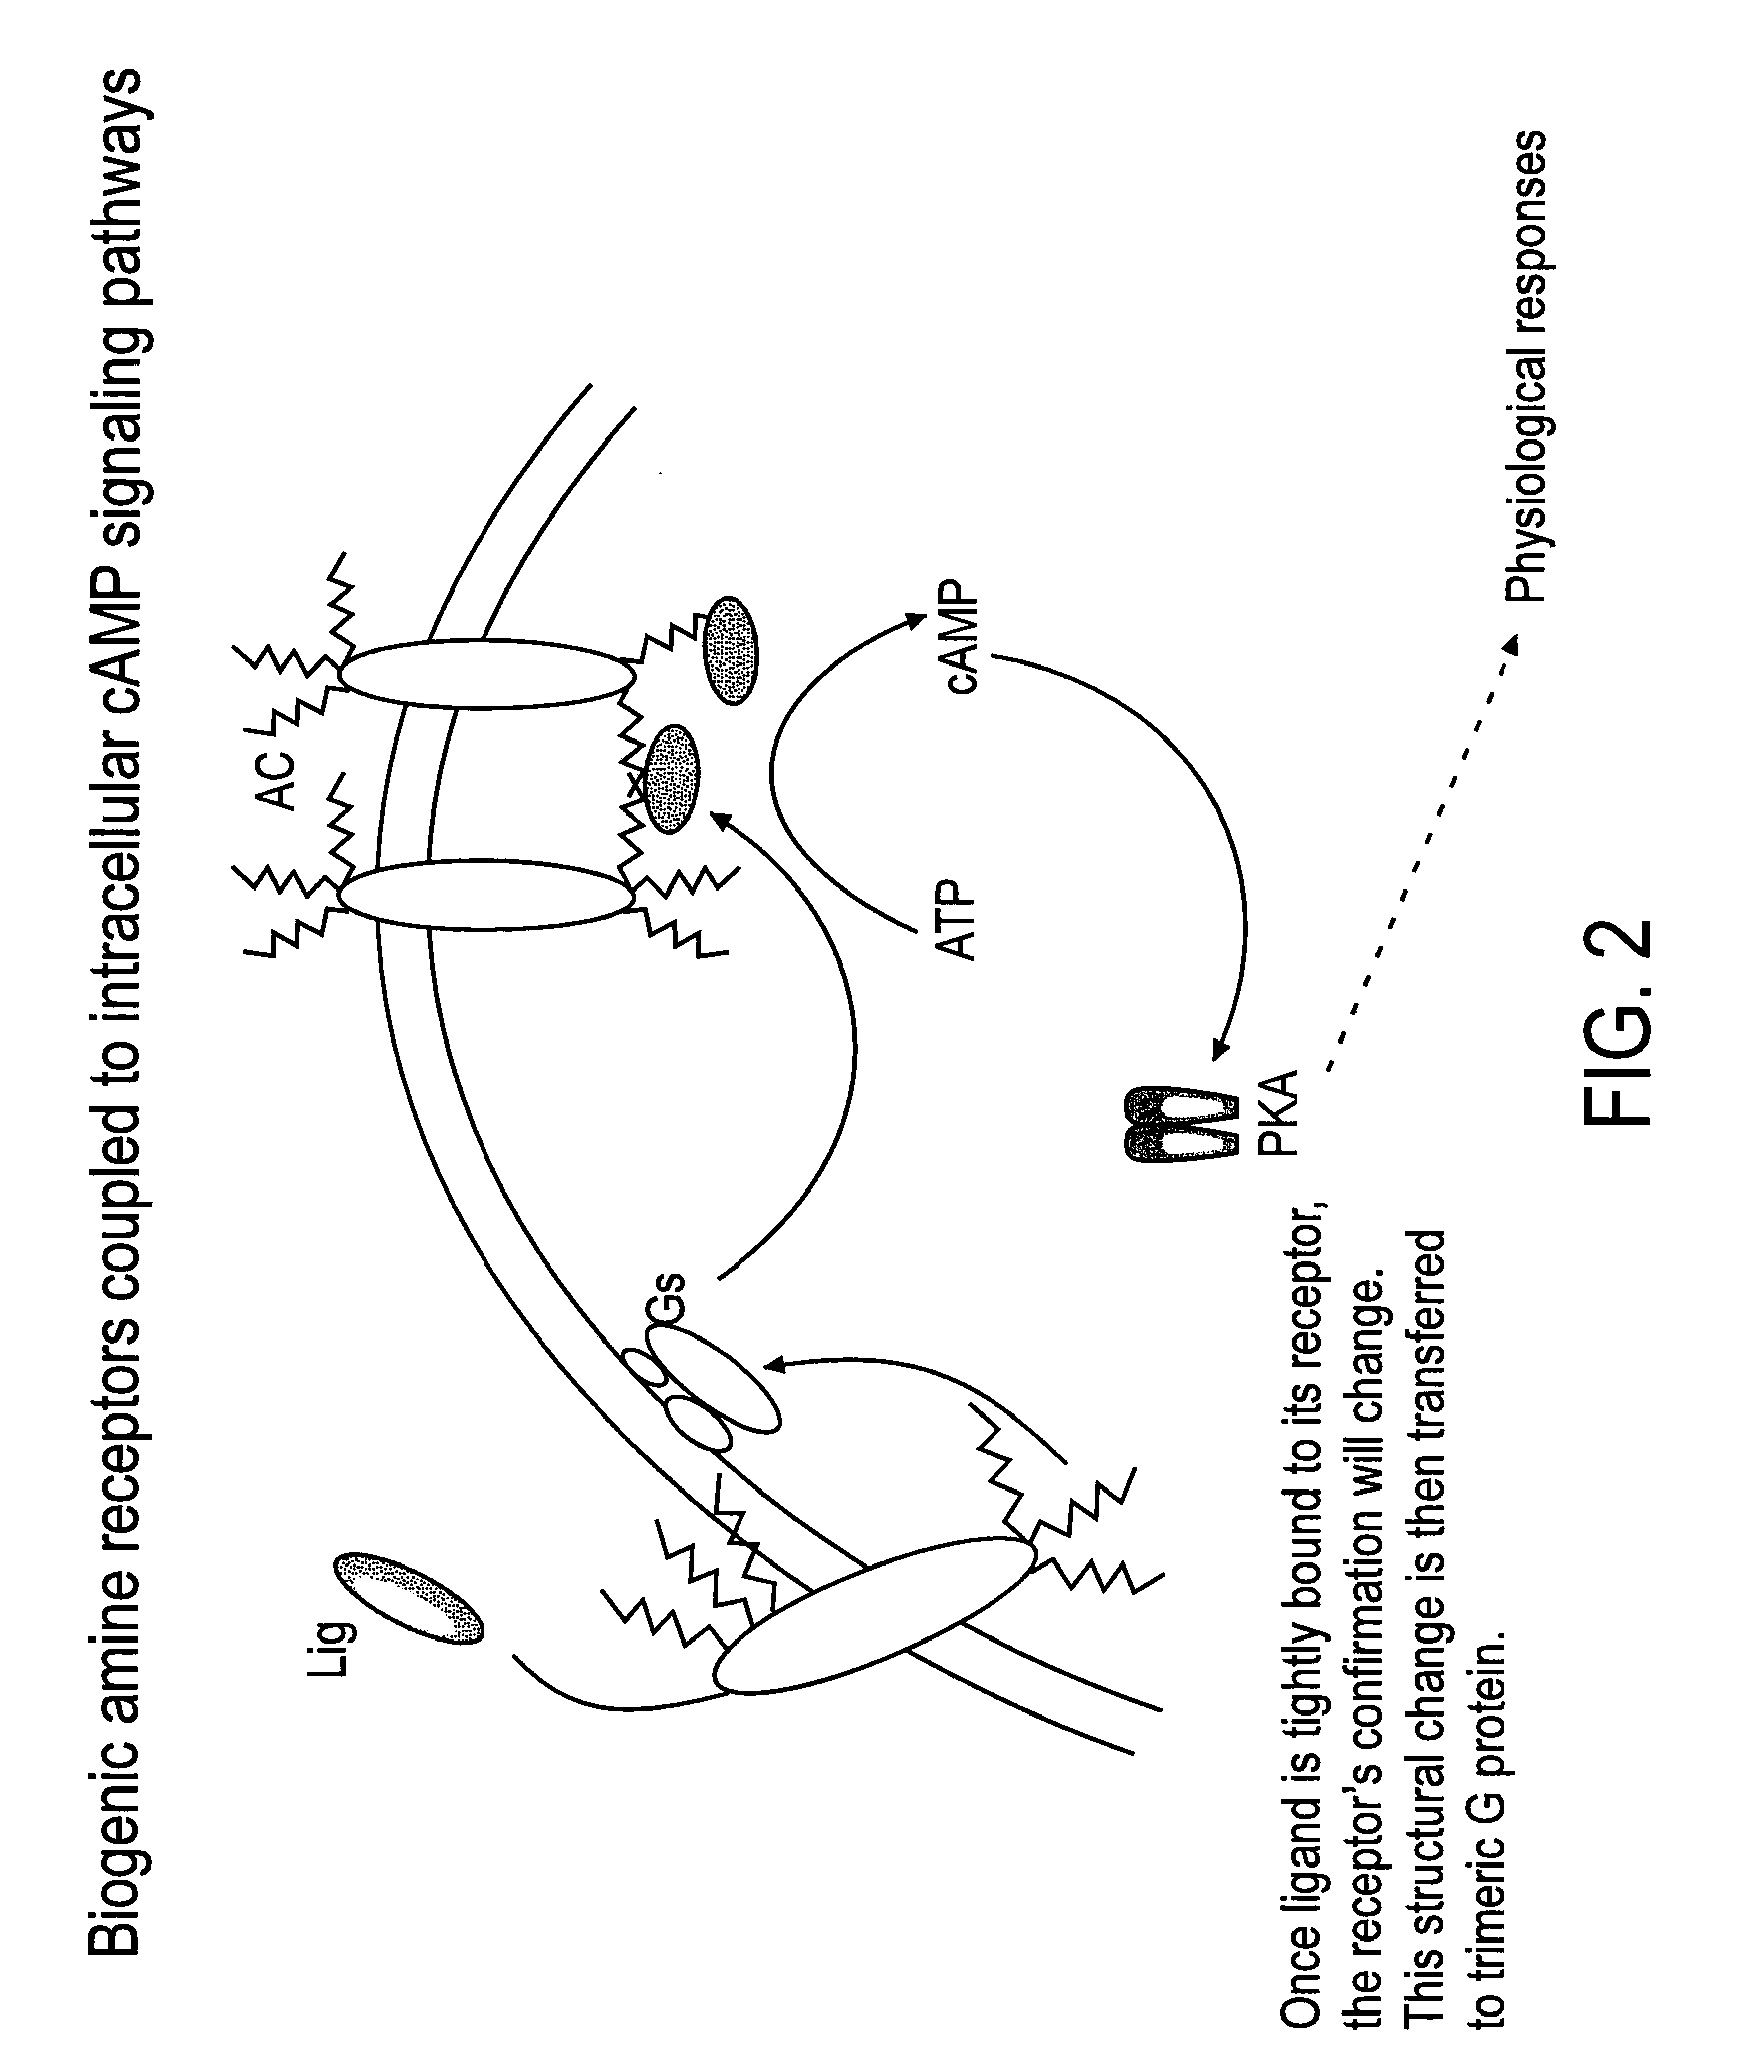 Pest control compositions and methods